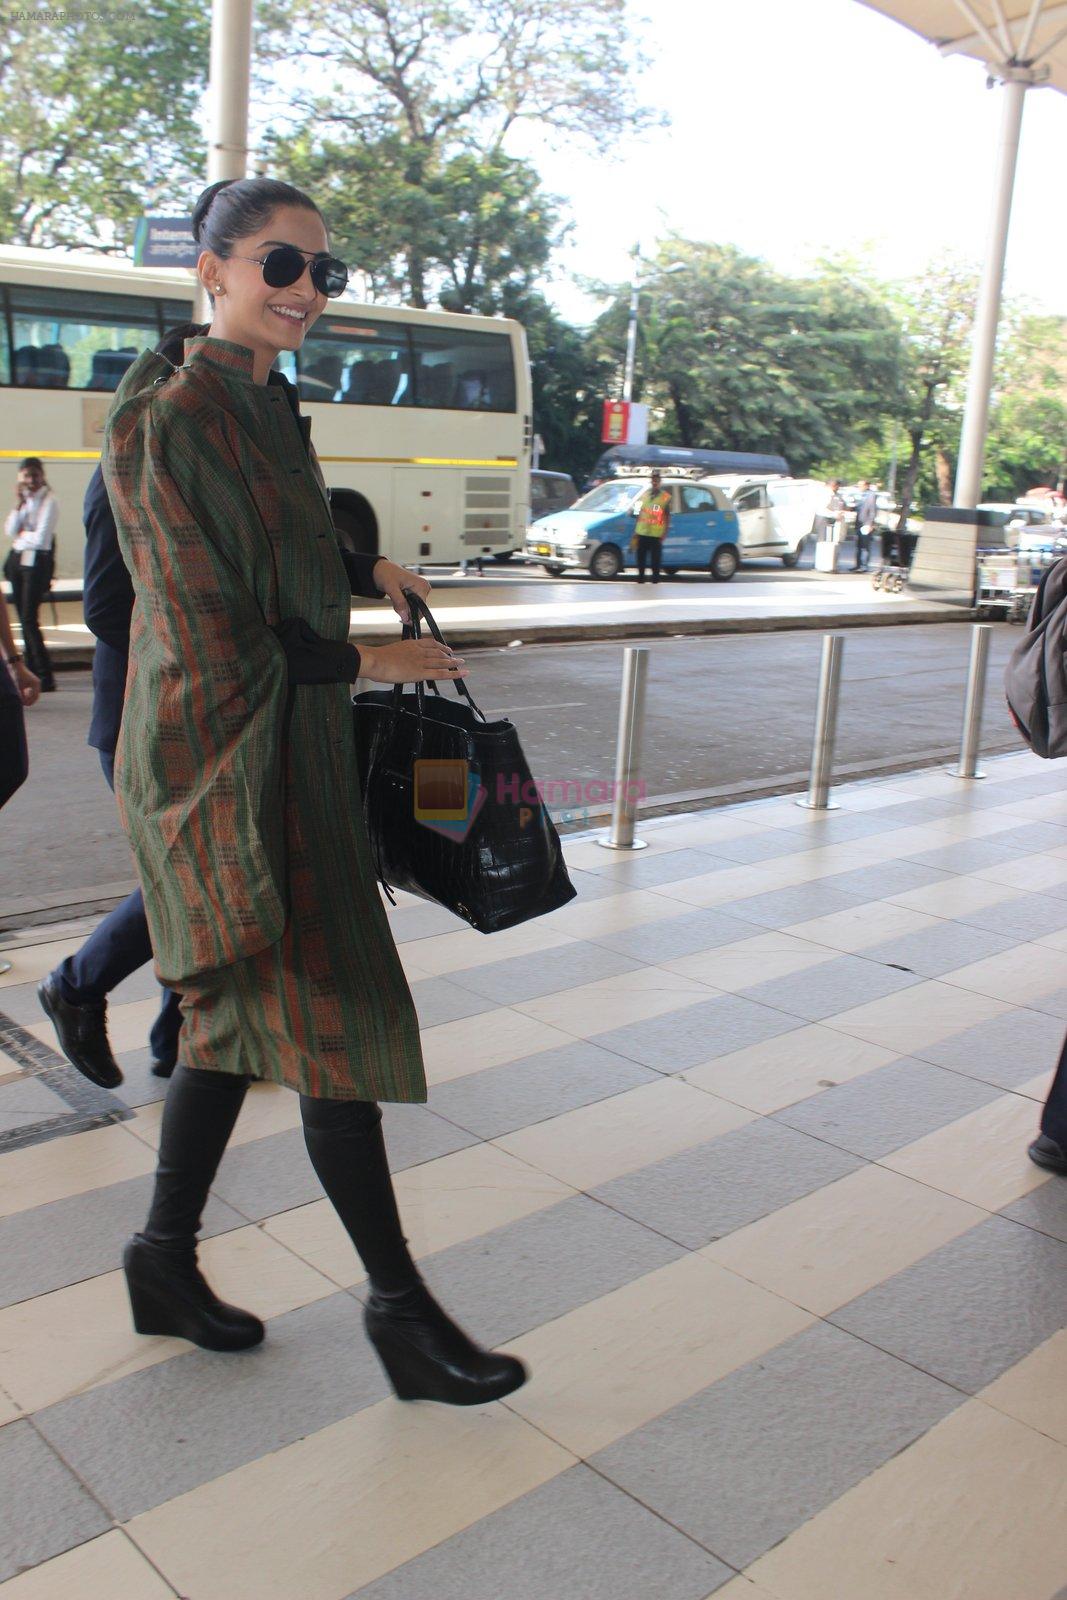 Sonam Kapoor snapped at airport on 13th Feb 2016